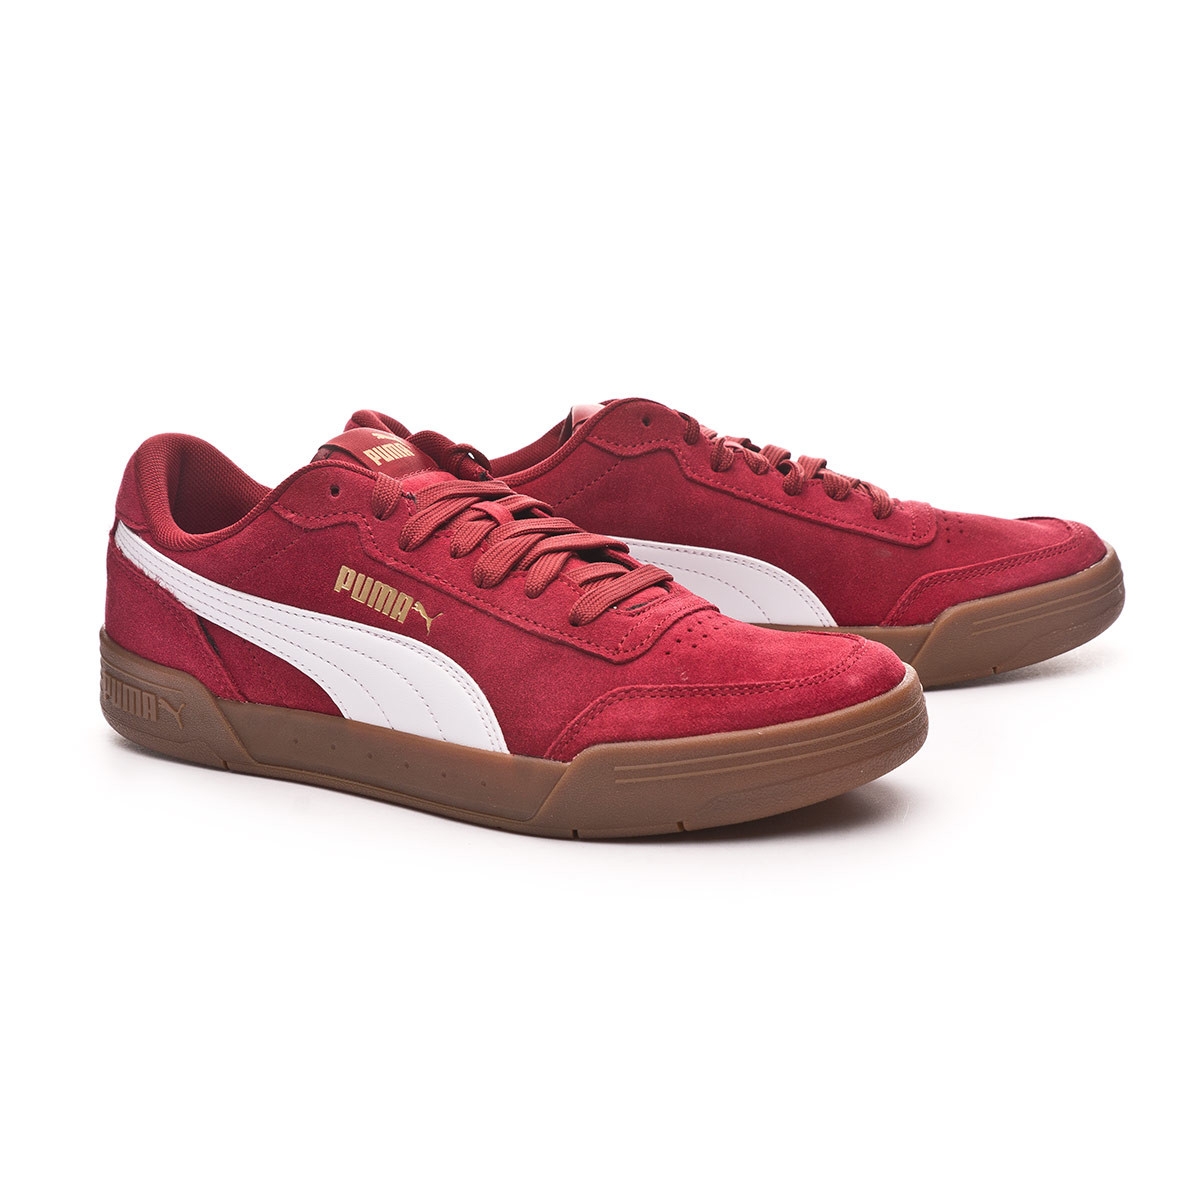 puma trainers with balls in sole